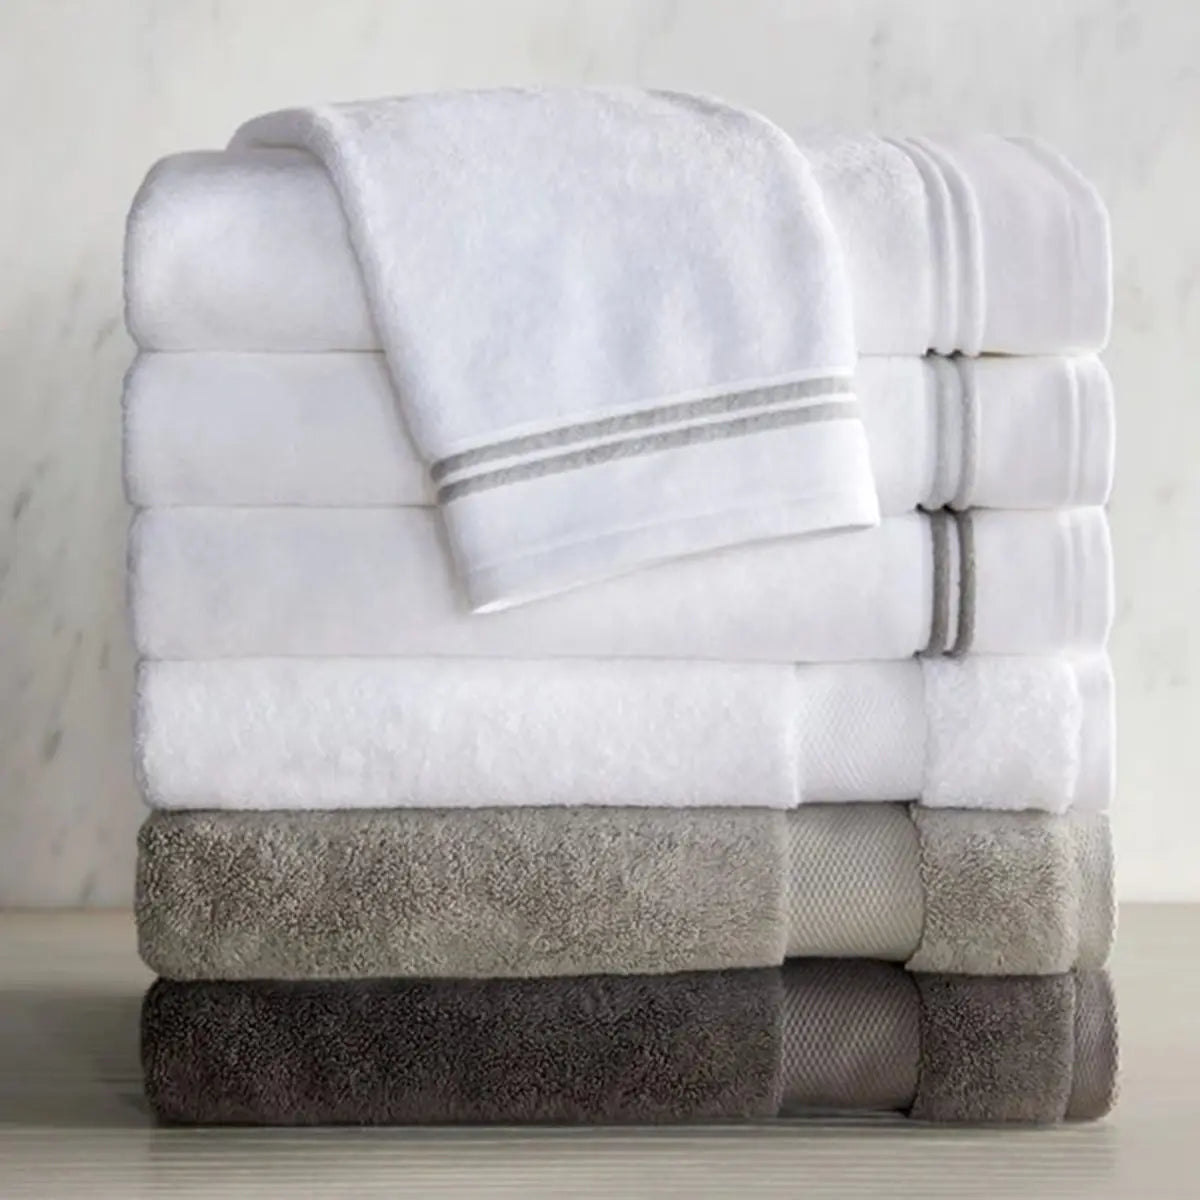 Sferra Aura Bath Towel Collection Stacked together